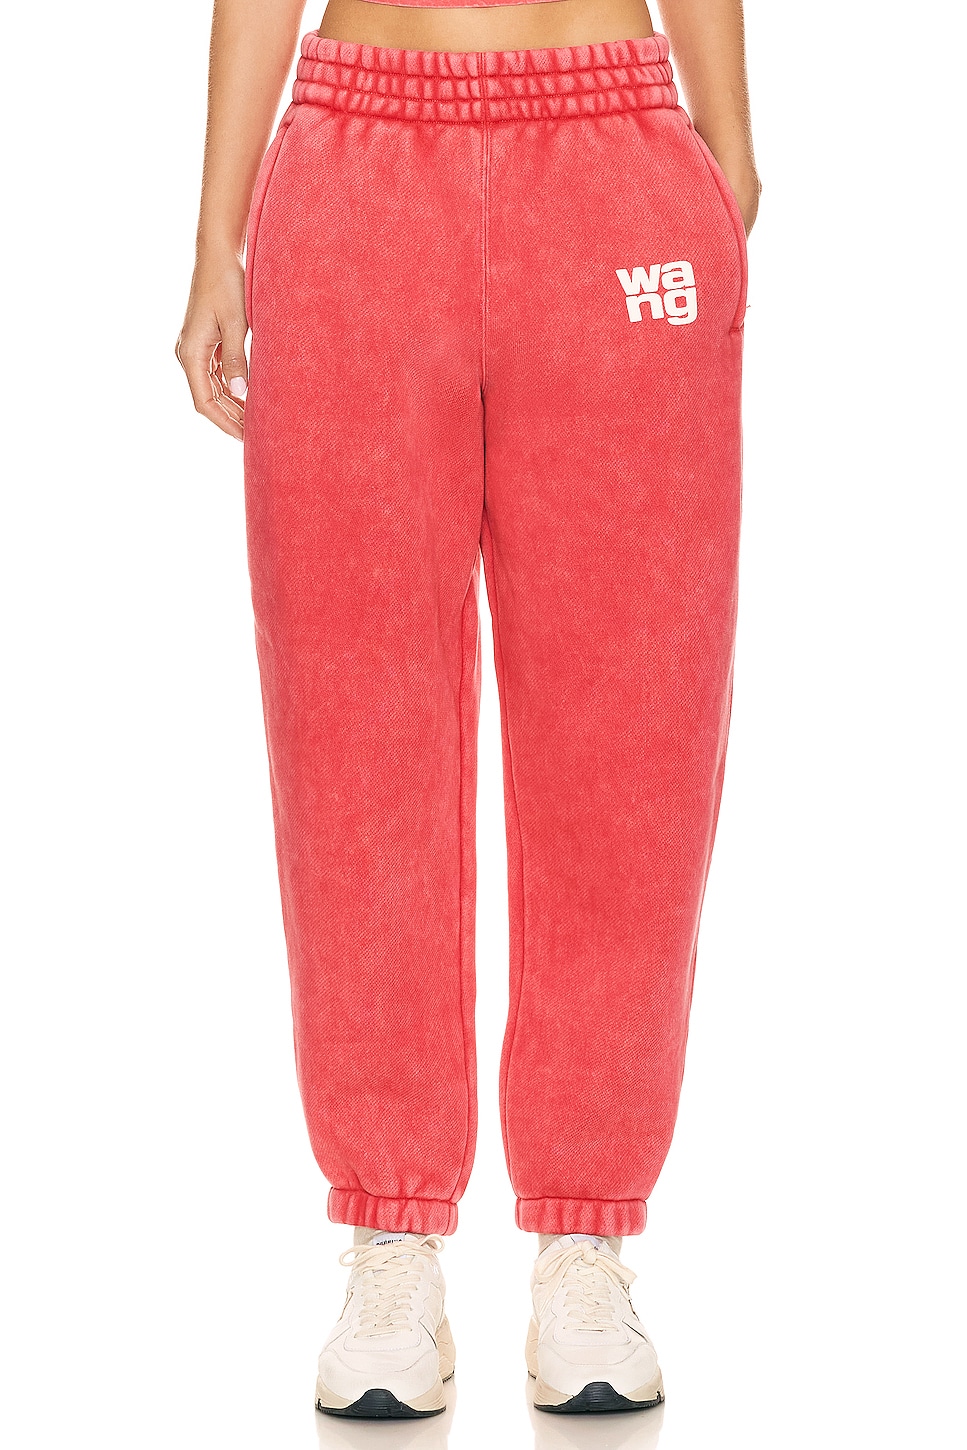 Alexander Wang Essential Classic Sweatpant in Soft Cherry